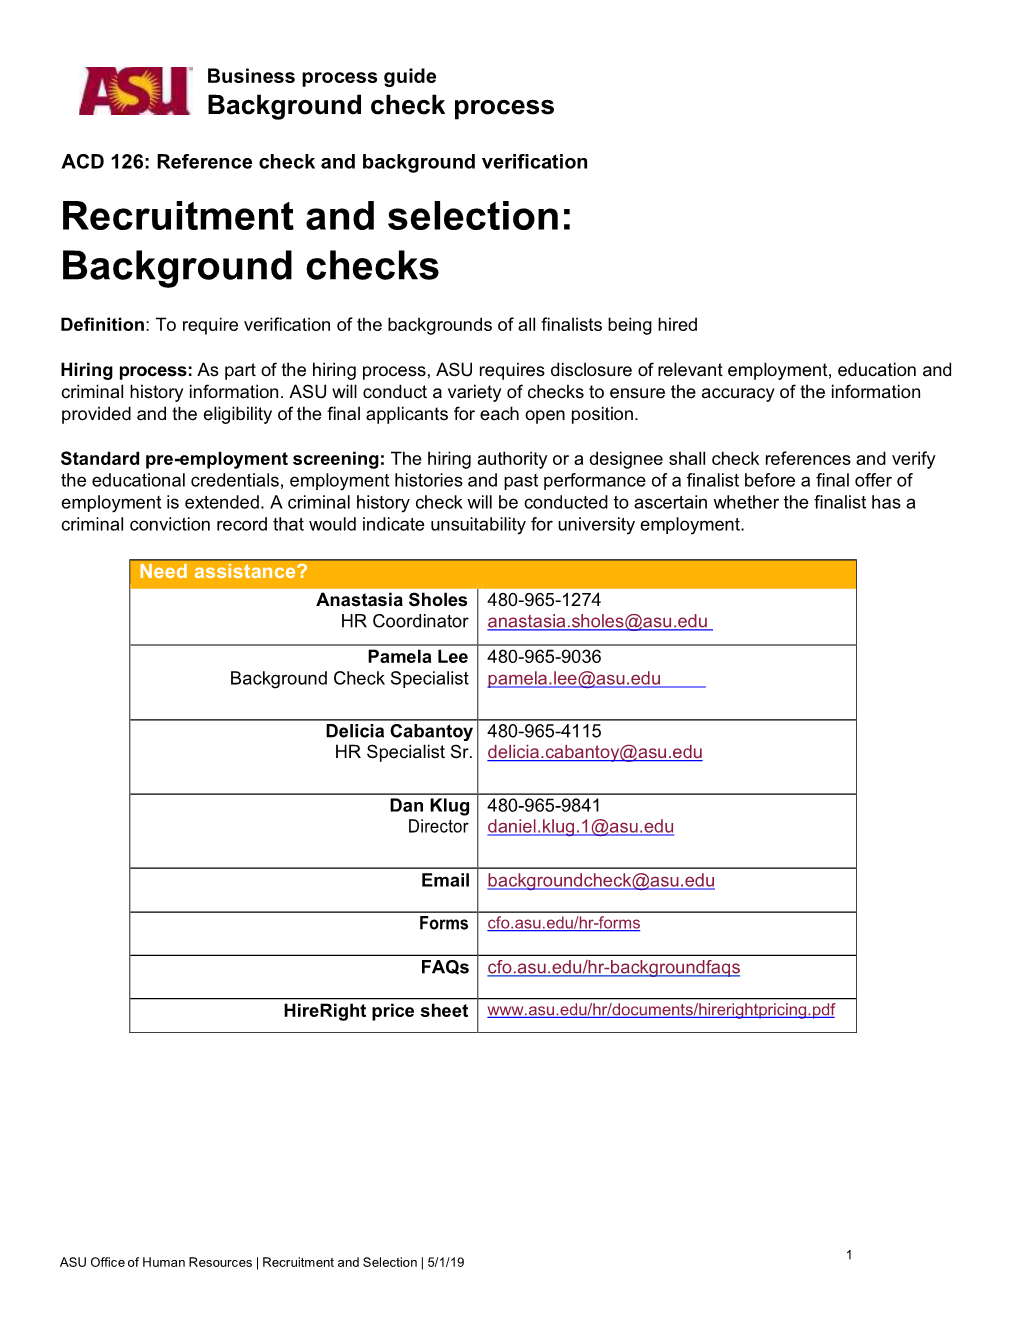 Recruitment and Selection: Background Checks